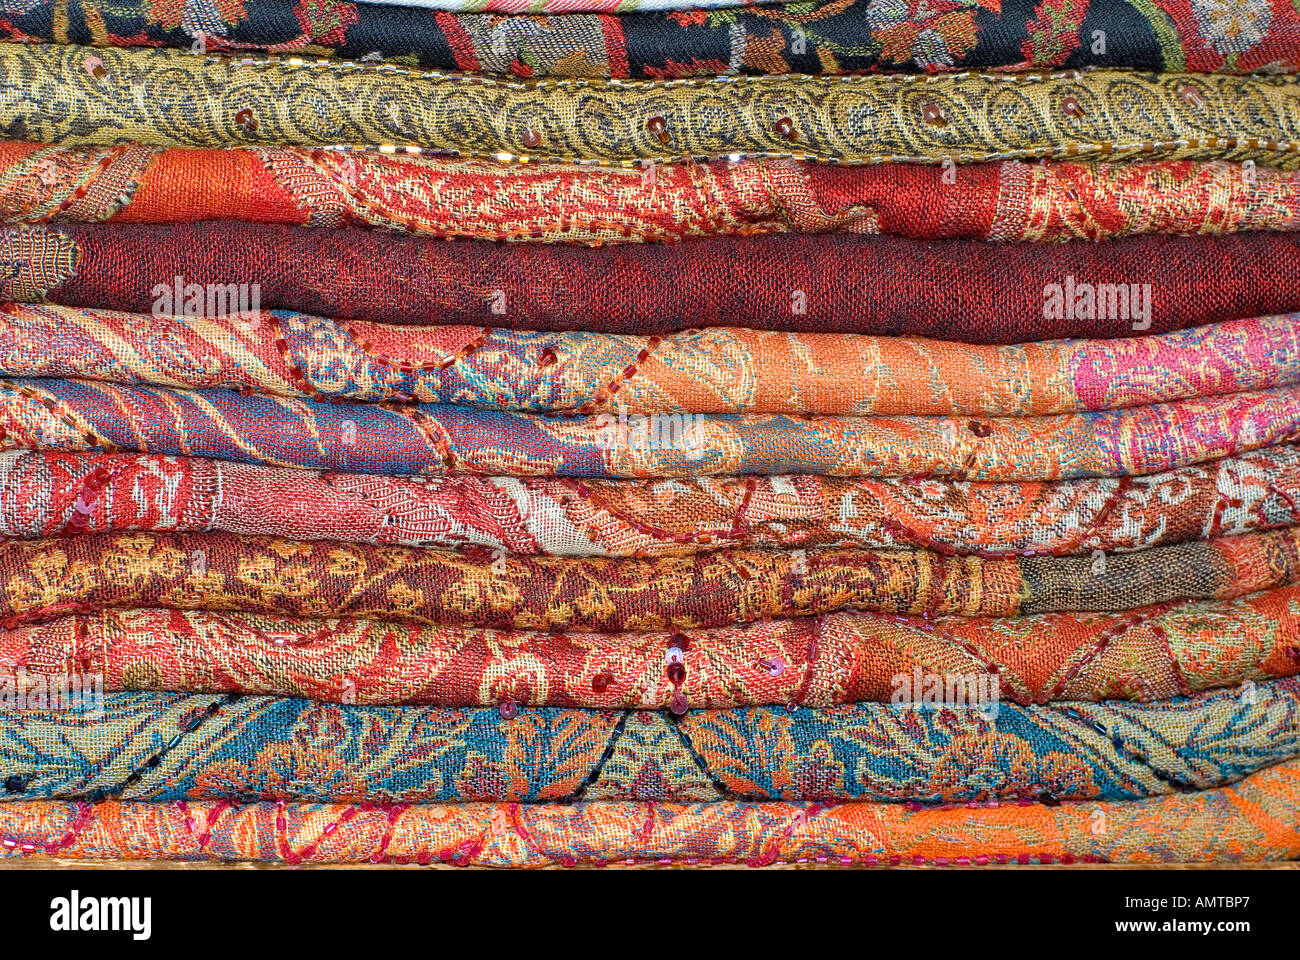 Stack of woven silk brocaded fabrics from India Stock Photo